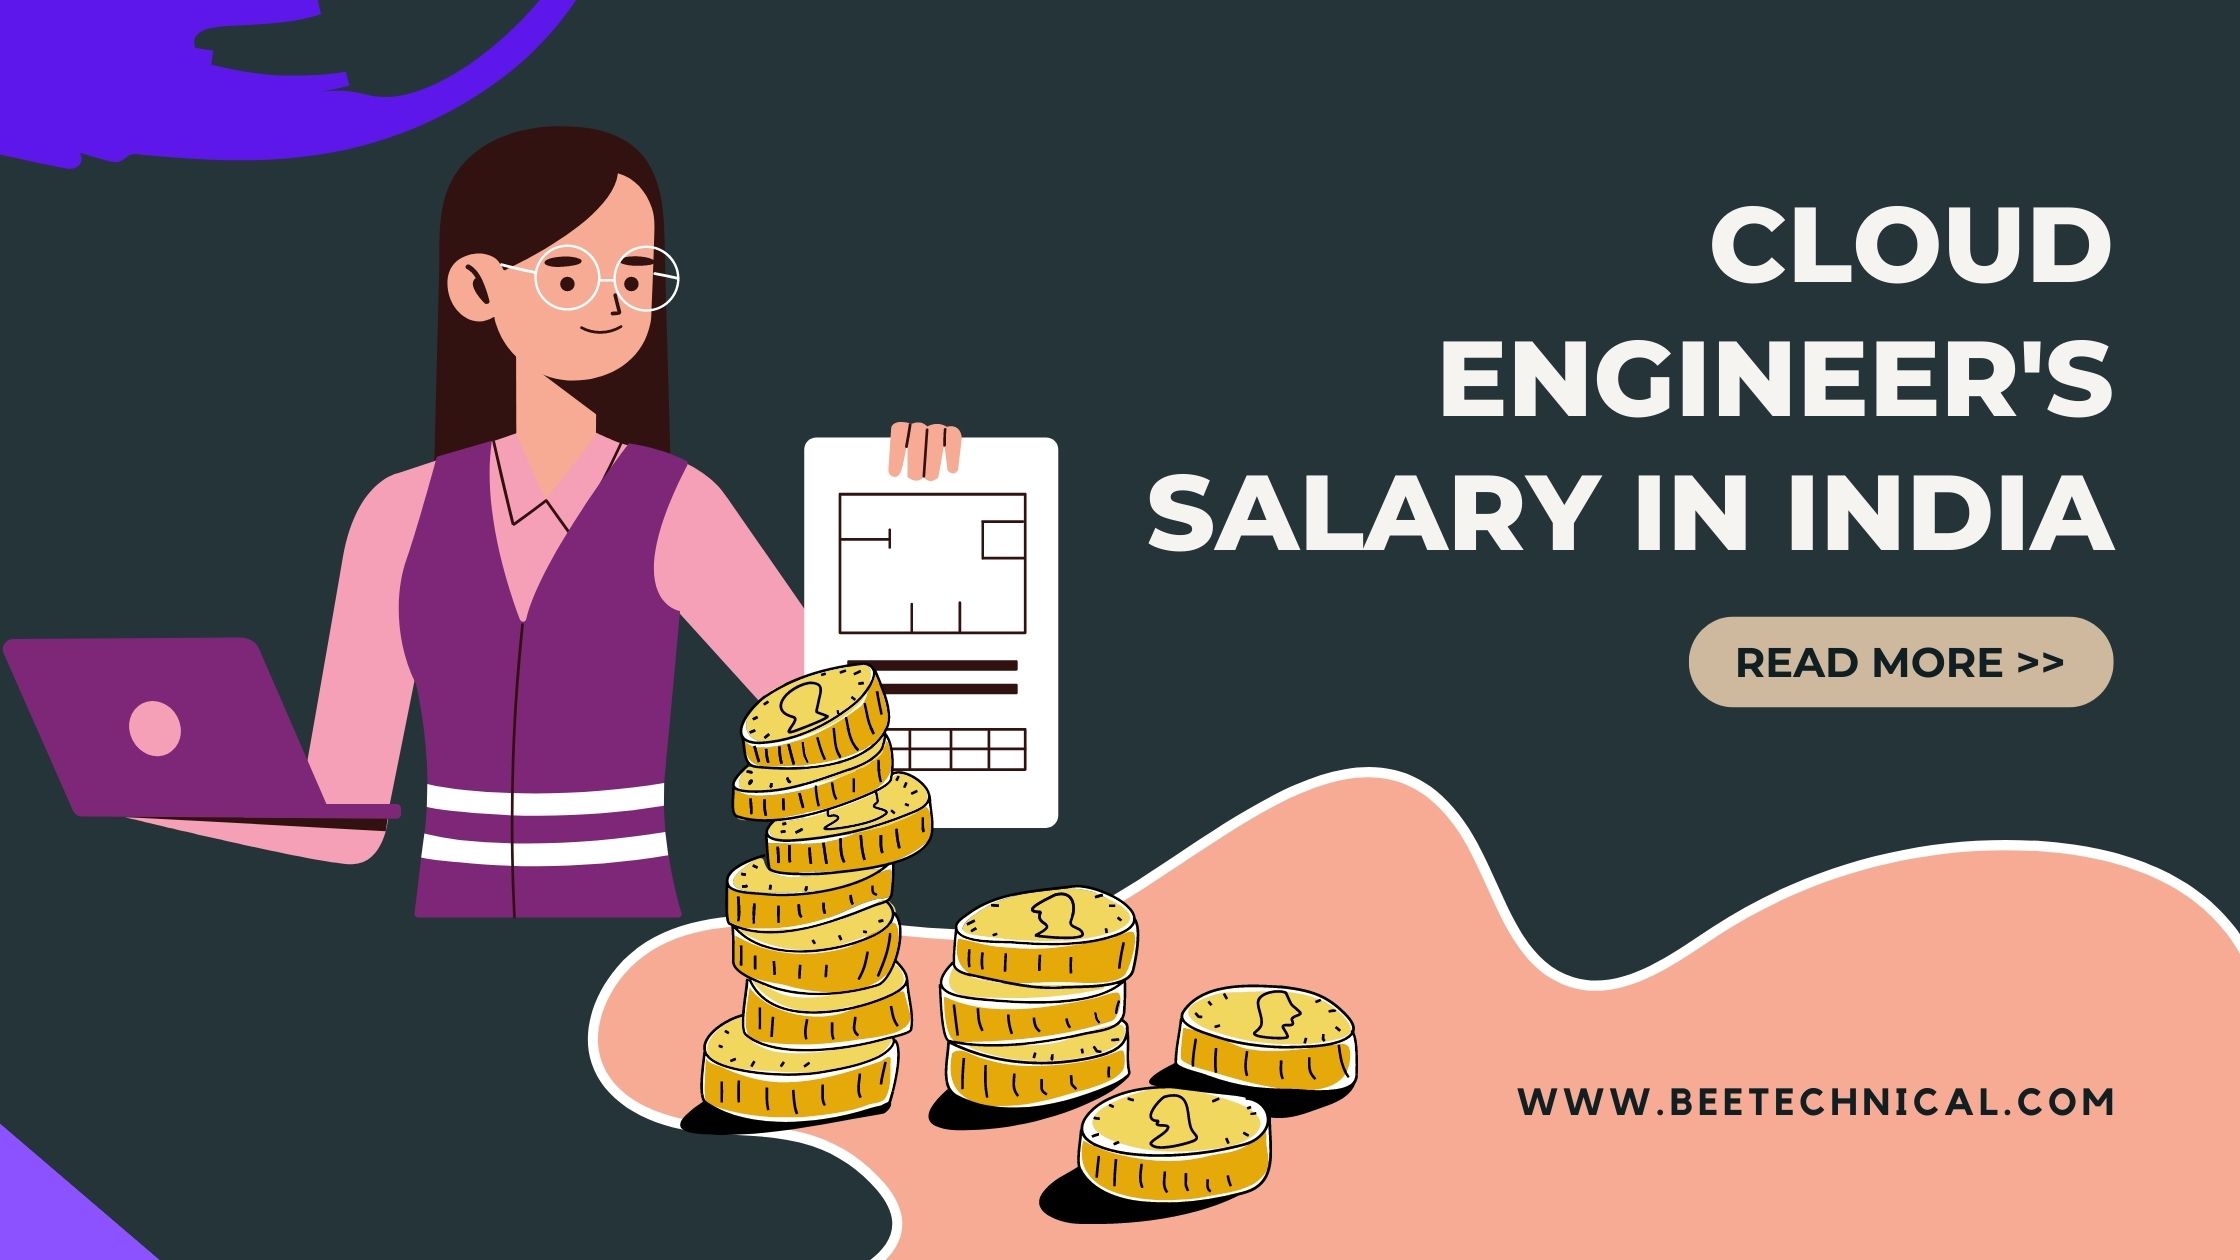 Cloud Engineer Salary in India Based on Locations